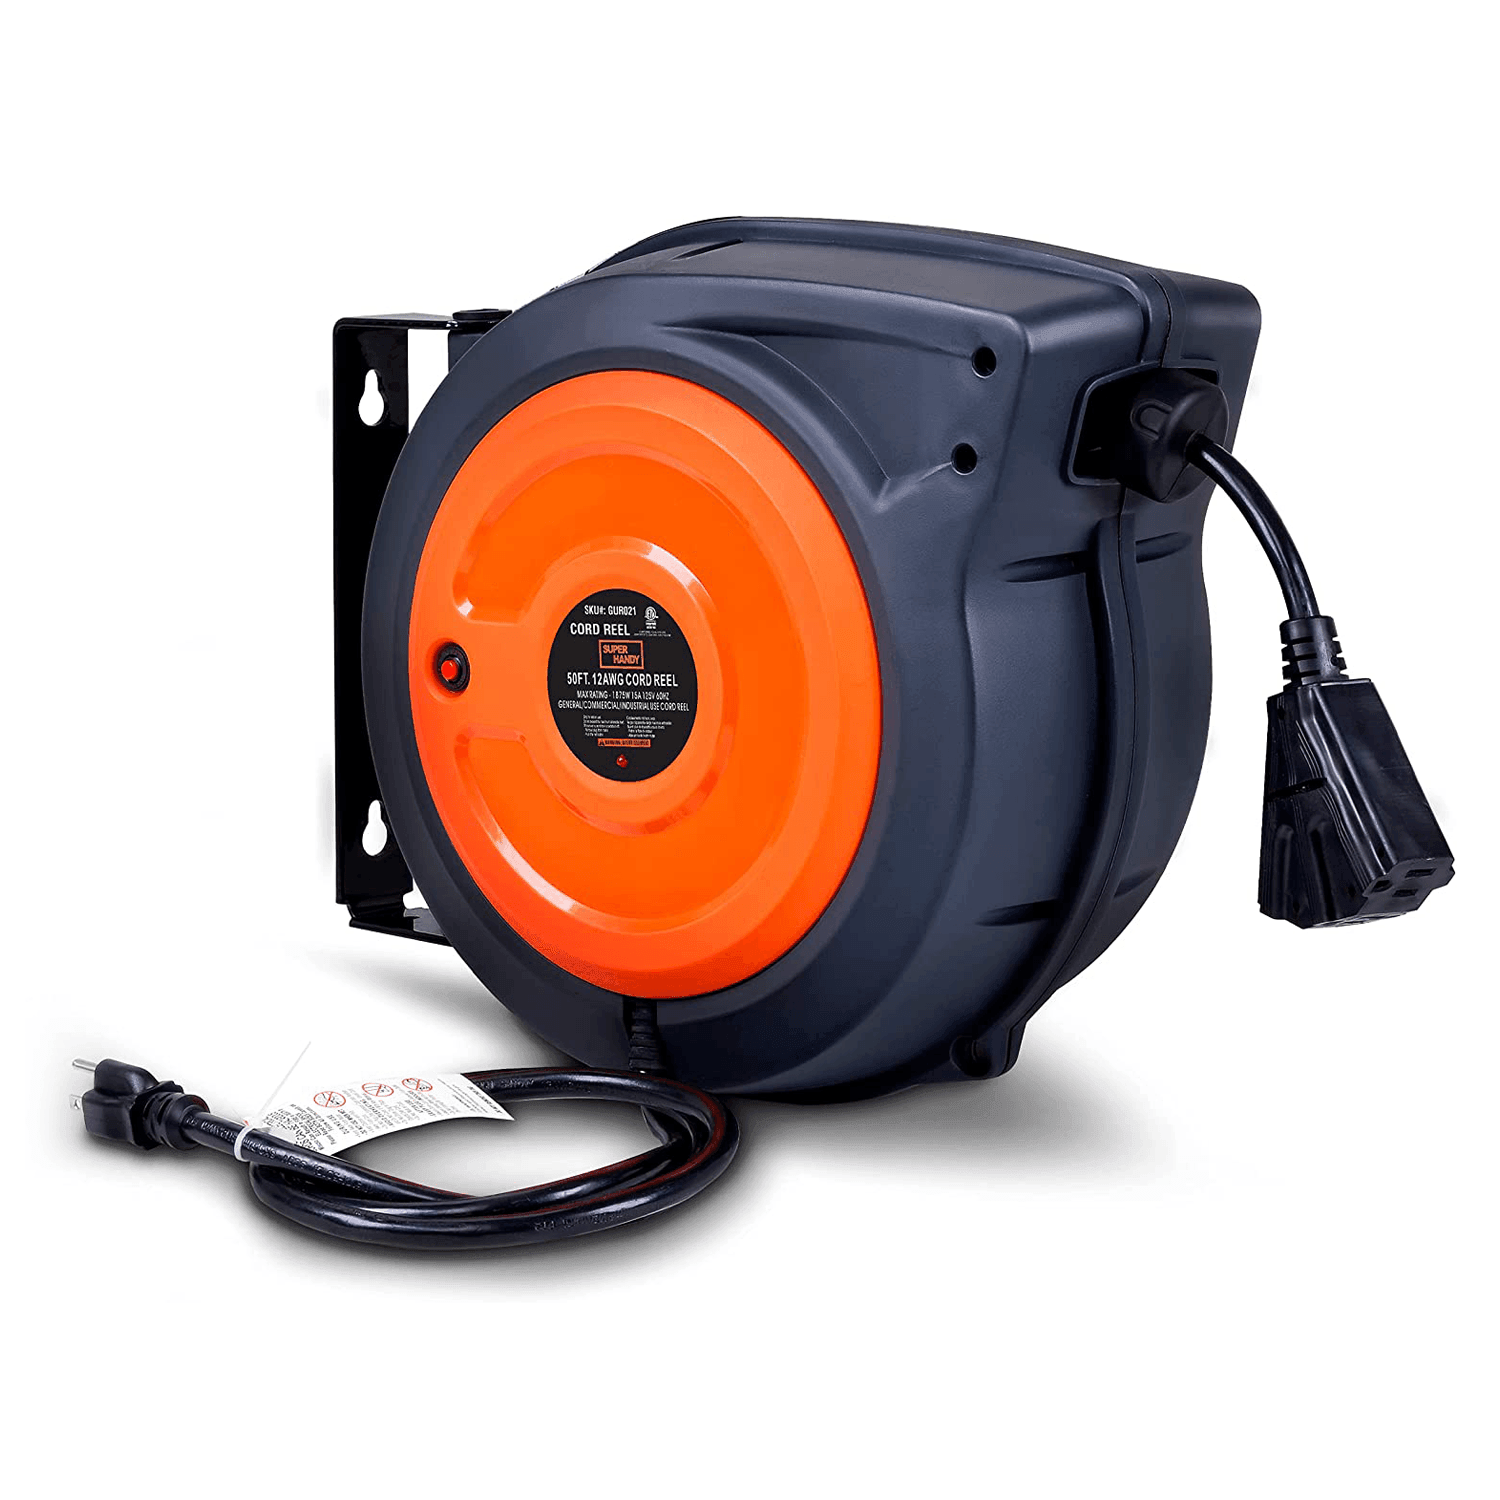  Retractable Extension Cord Reel,65 Feet 12 AWG/3C